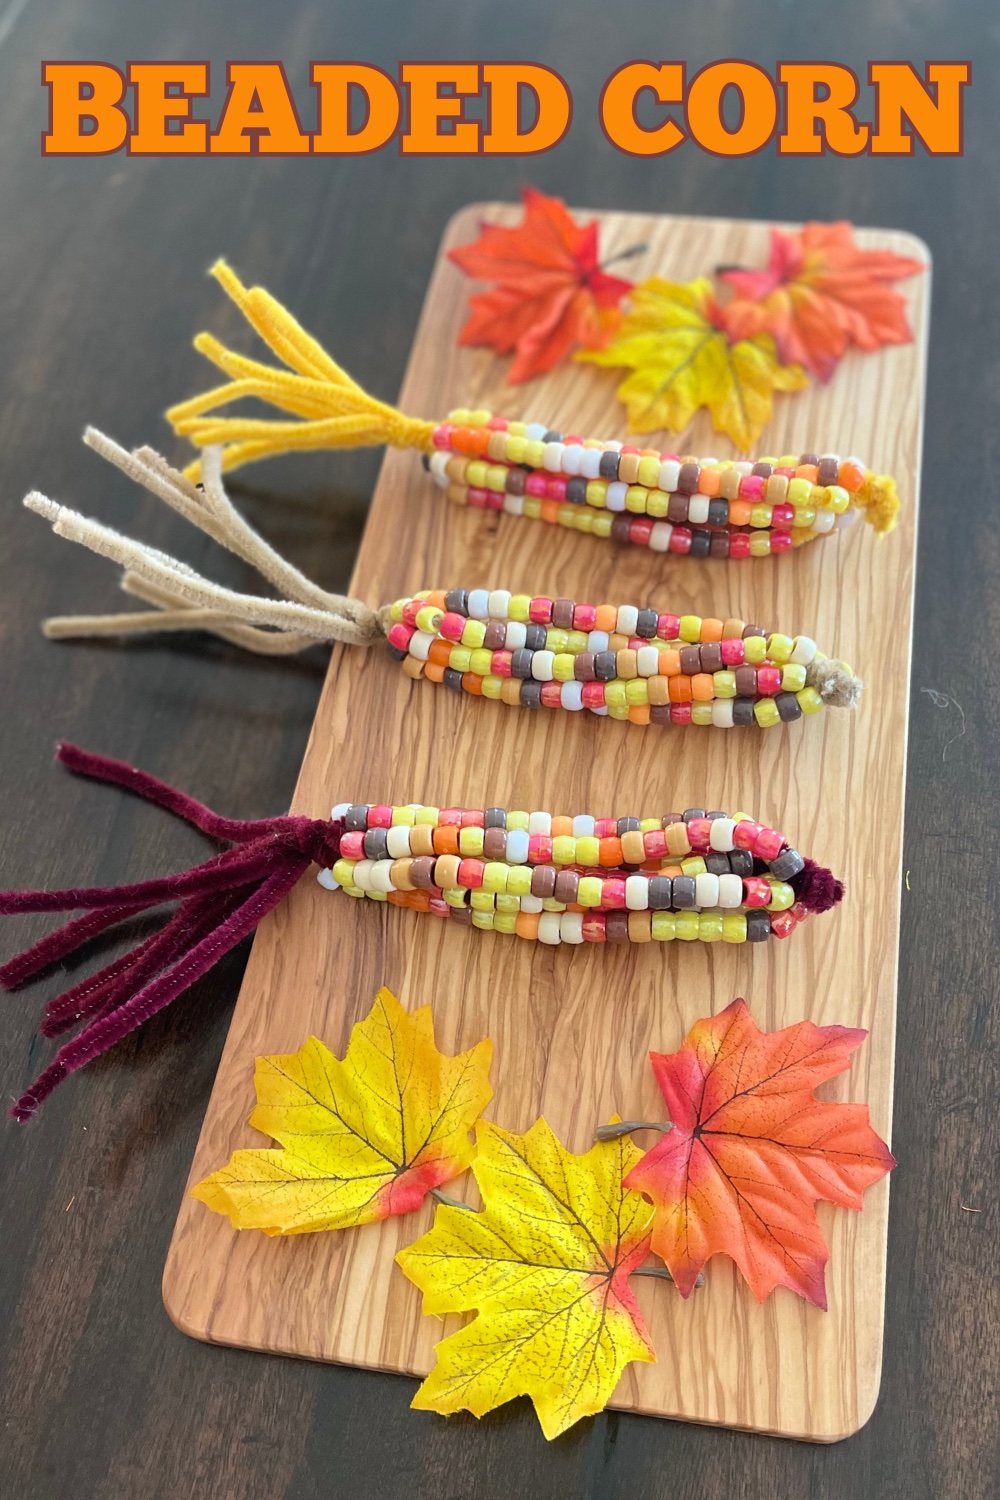 Beaded corn crafts with pipe cleaners and pony beads is a fun and educational fall activity for kids. Let your kids explore creativity and fine motor skills this fall!